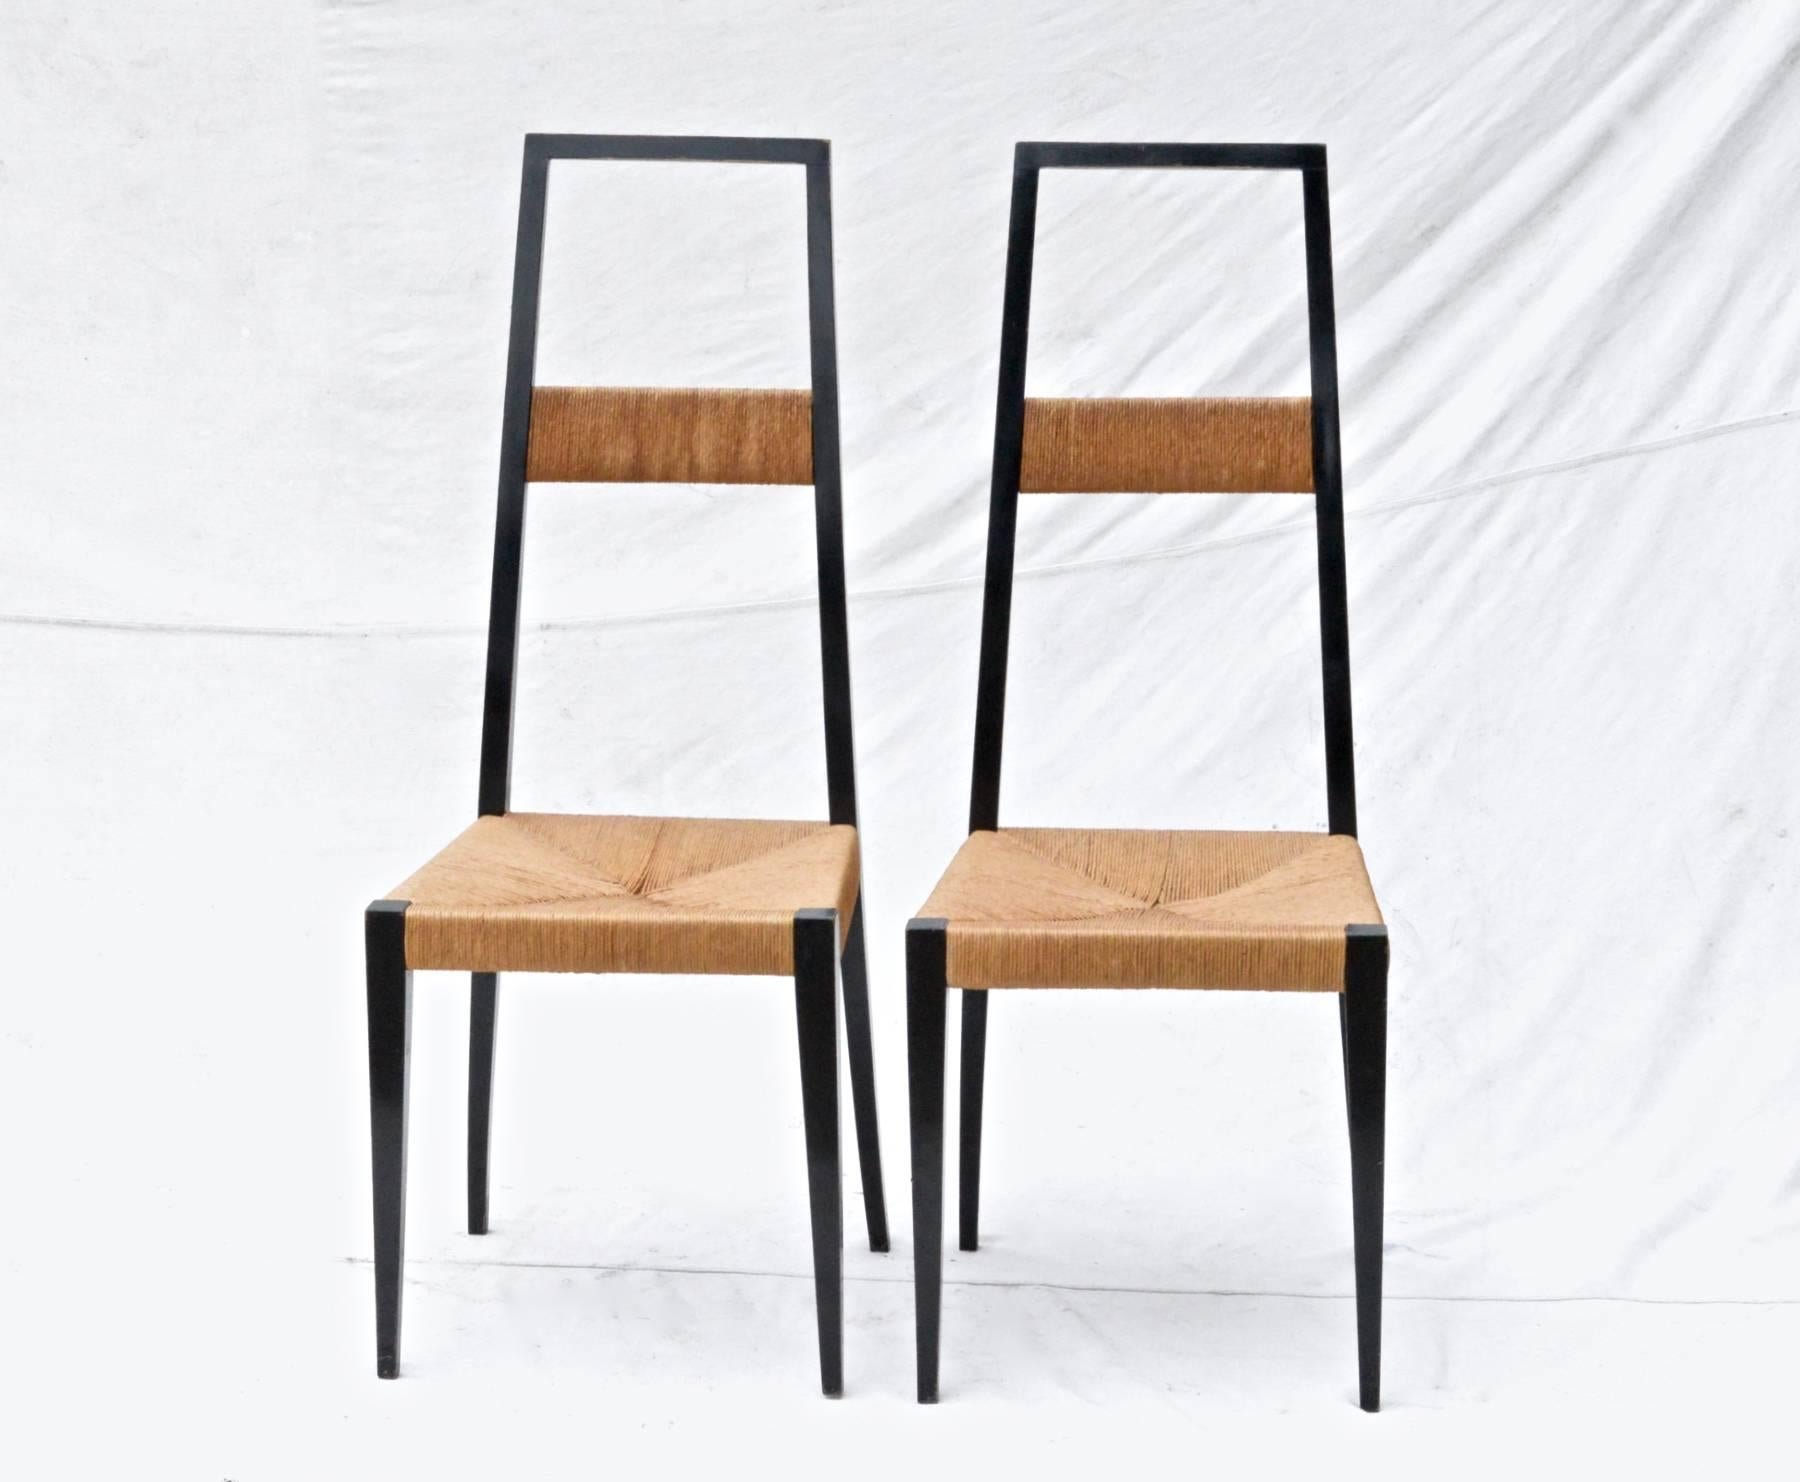 A striking pair of ebonized high back side chairs in the distinct style and manner of Gio Ponti. Attention to detail and smart design are obviously hallmarks of these beautifully made chairs. Original black finish shows attractive wear. Rush is in